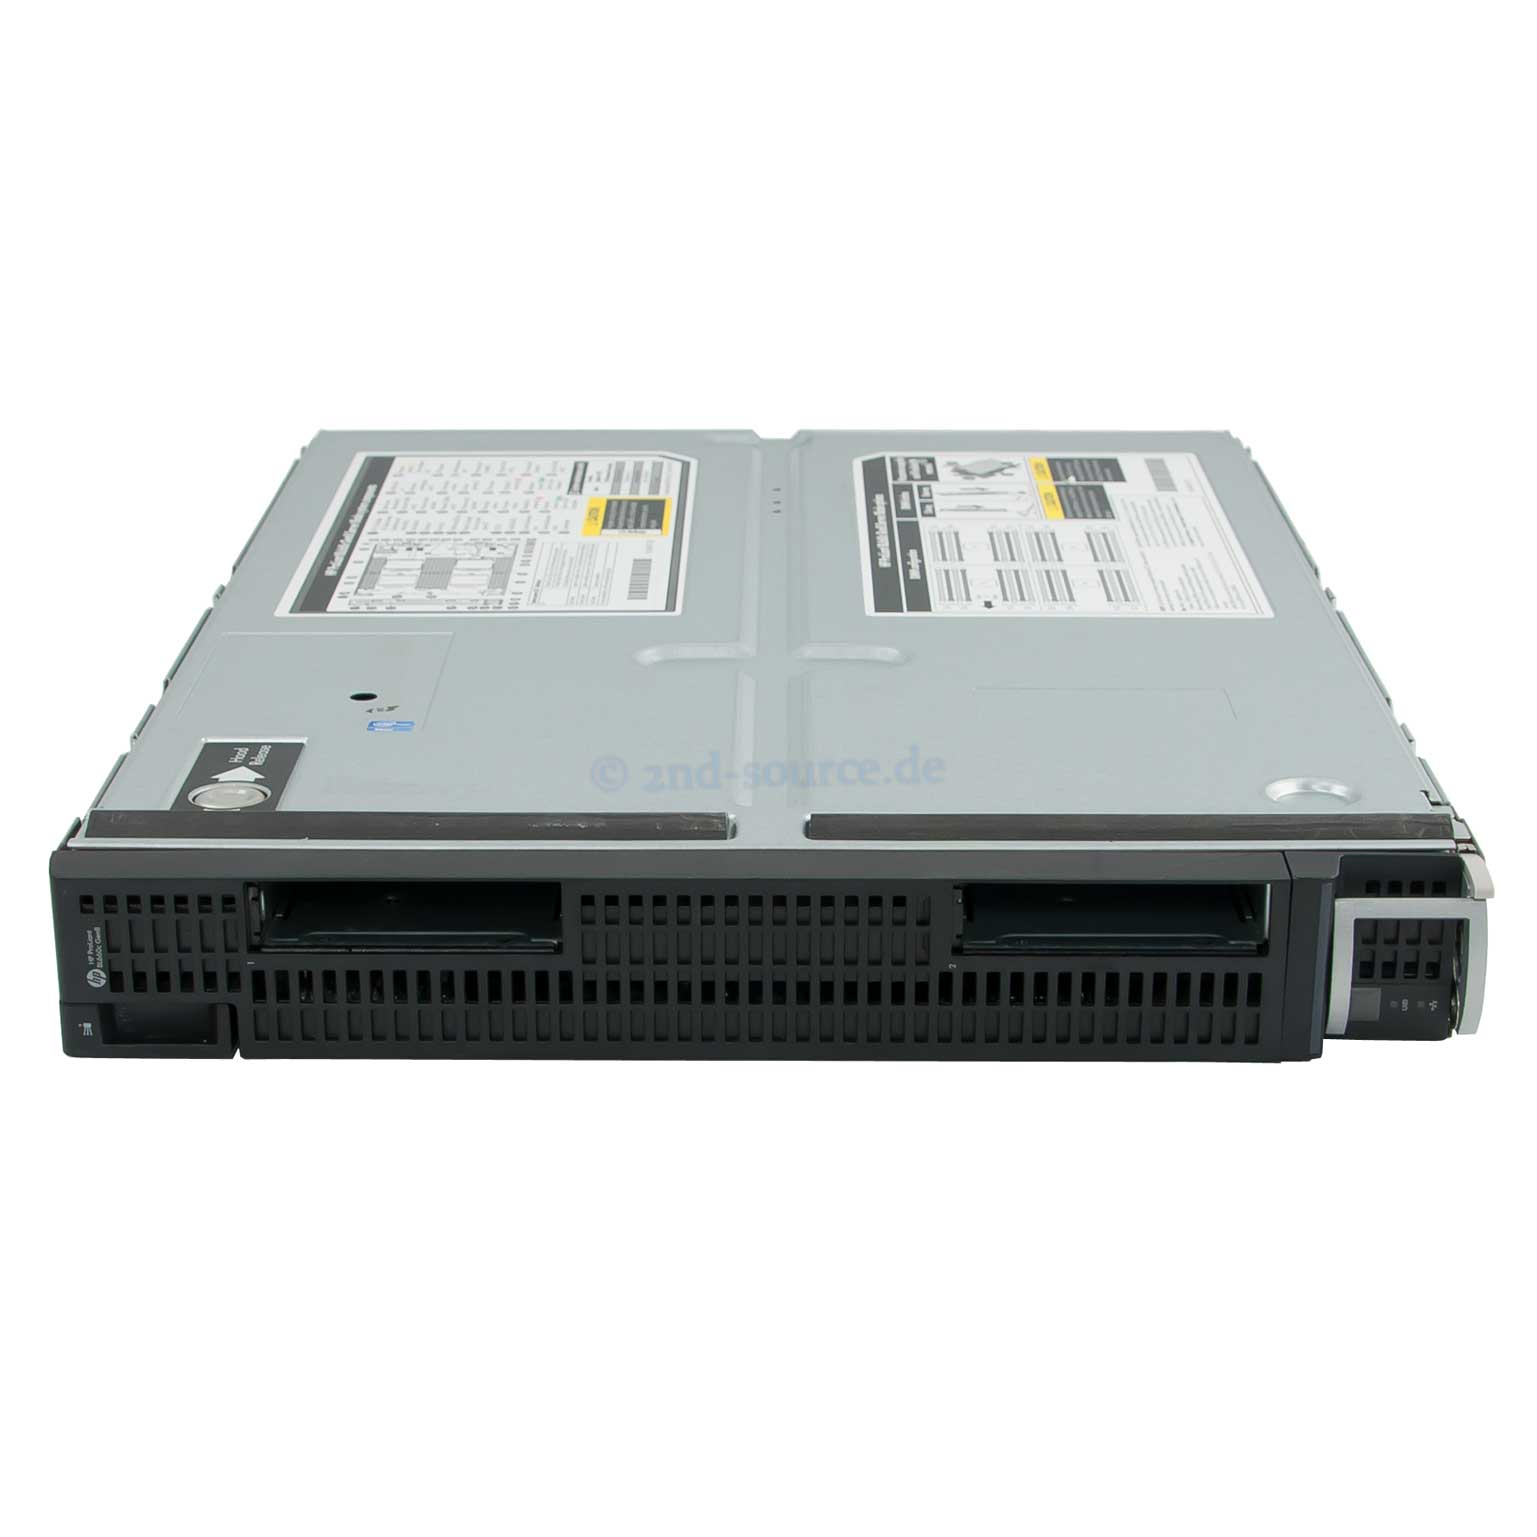 HPE BL660c G8 P220i 2x2.5'' SFF CTO Chassis 679118-B21 742361-001